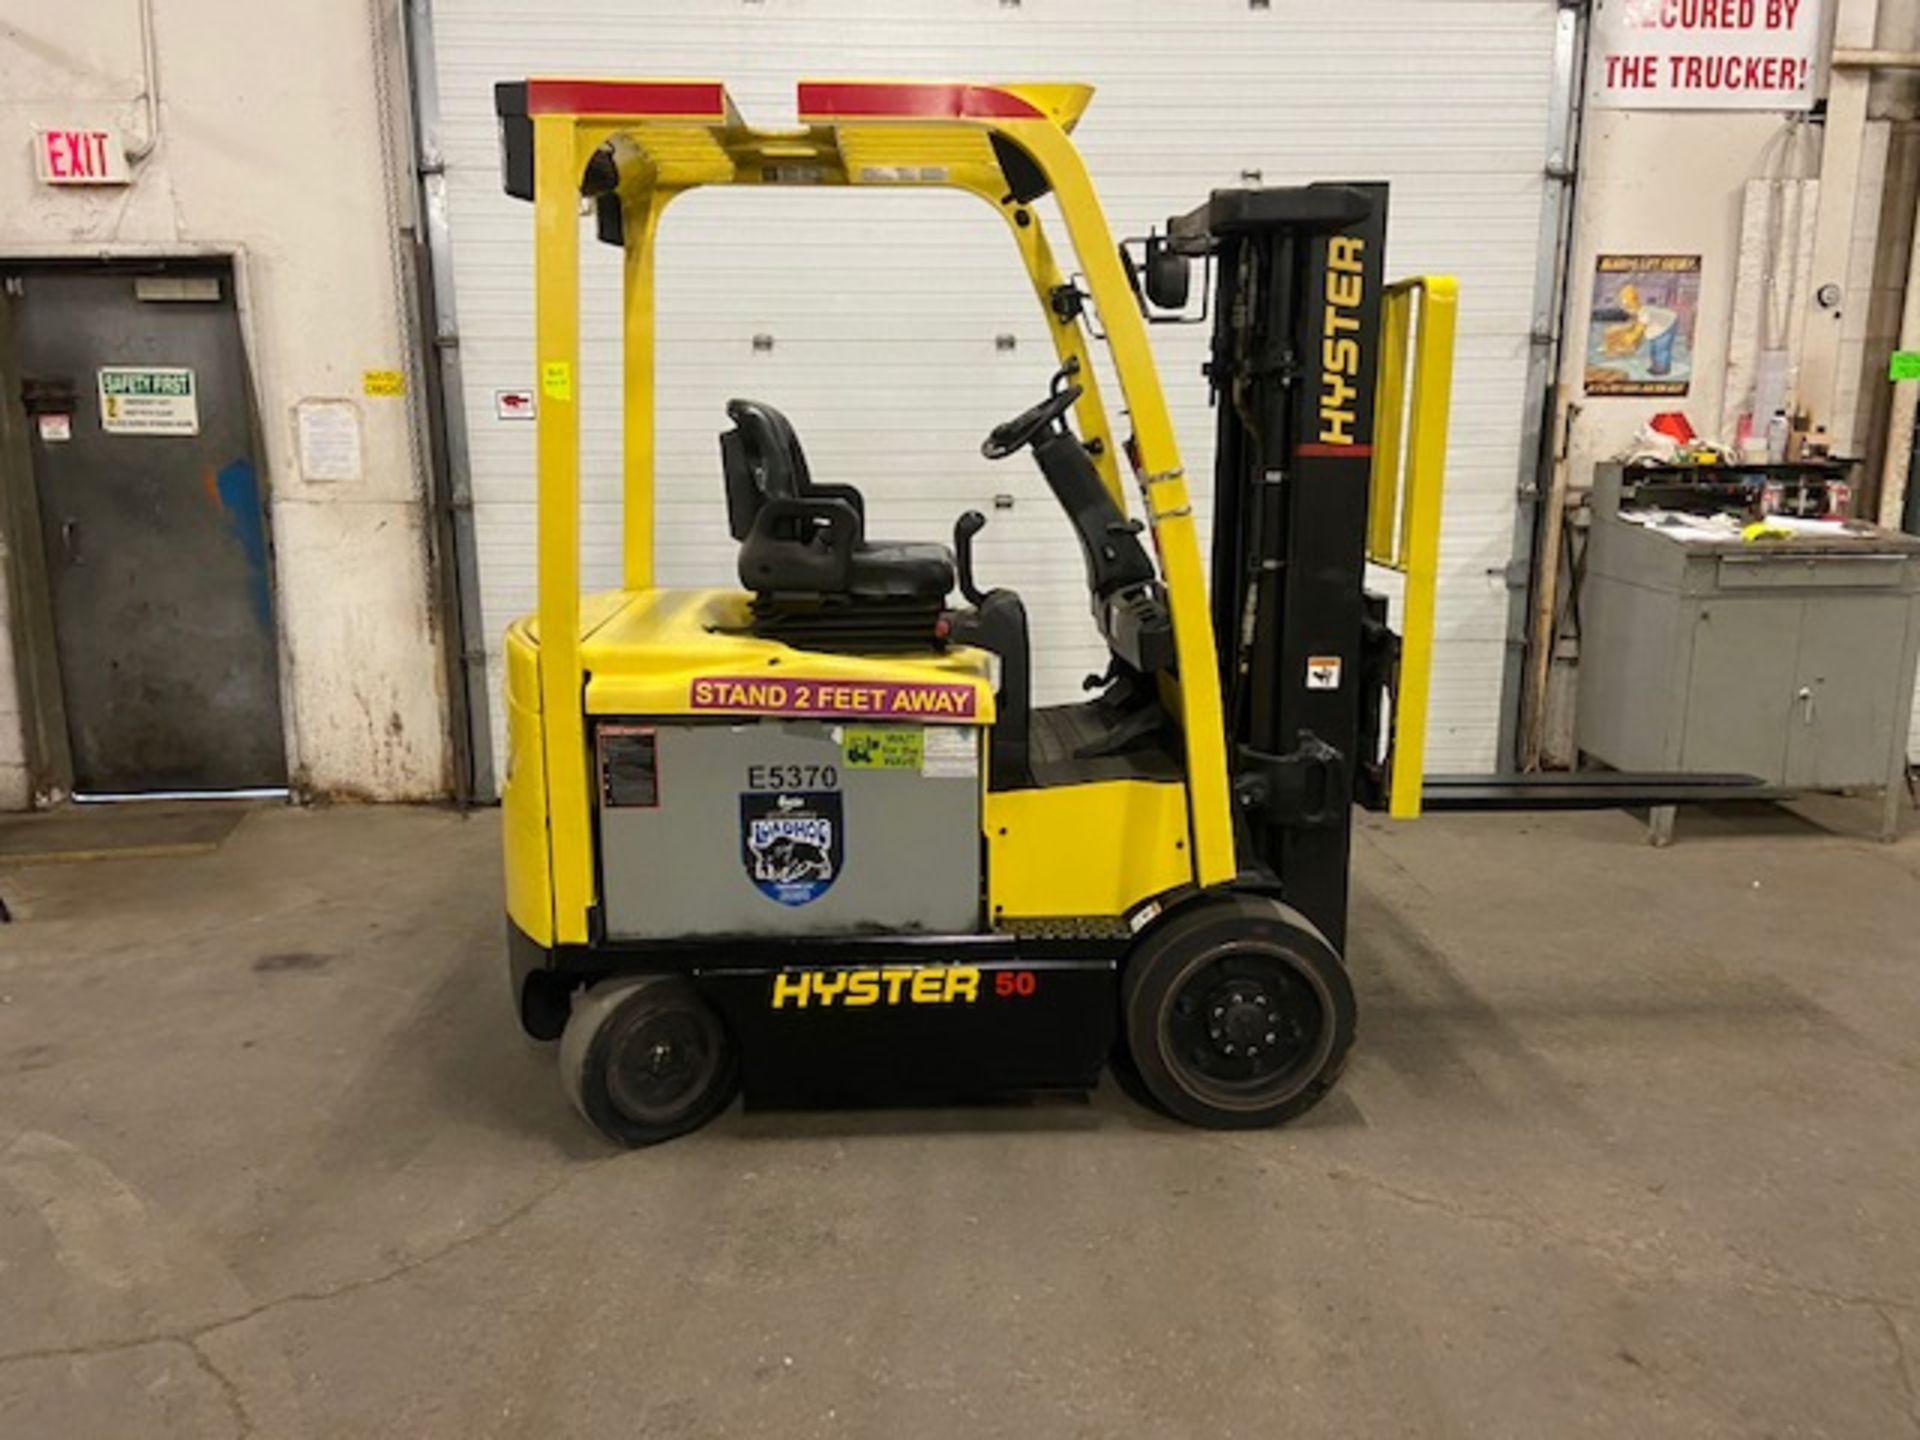 FREE CUSTOMS - 2012 Hyster 5000lbs Capacity Forklift with 3-stage mast - electric with sideshift